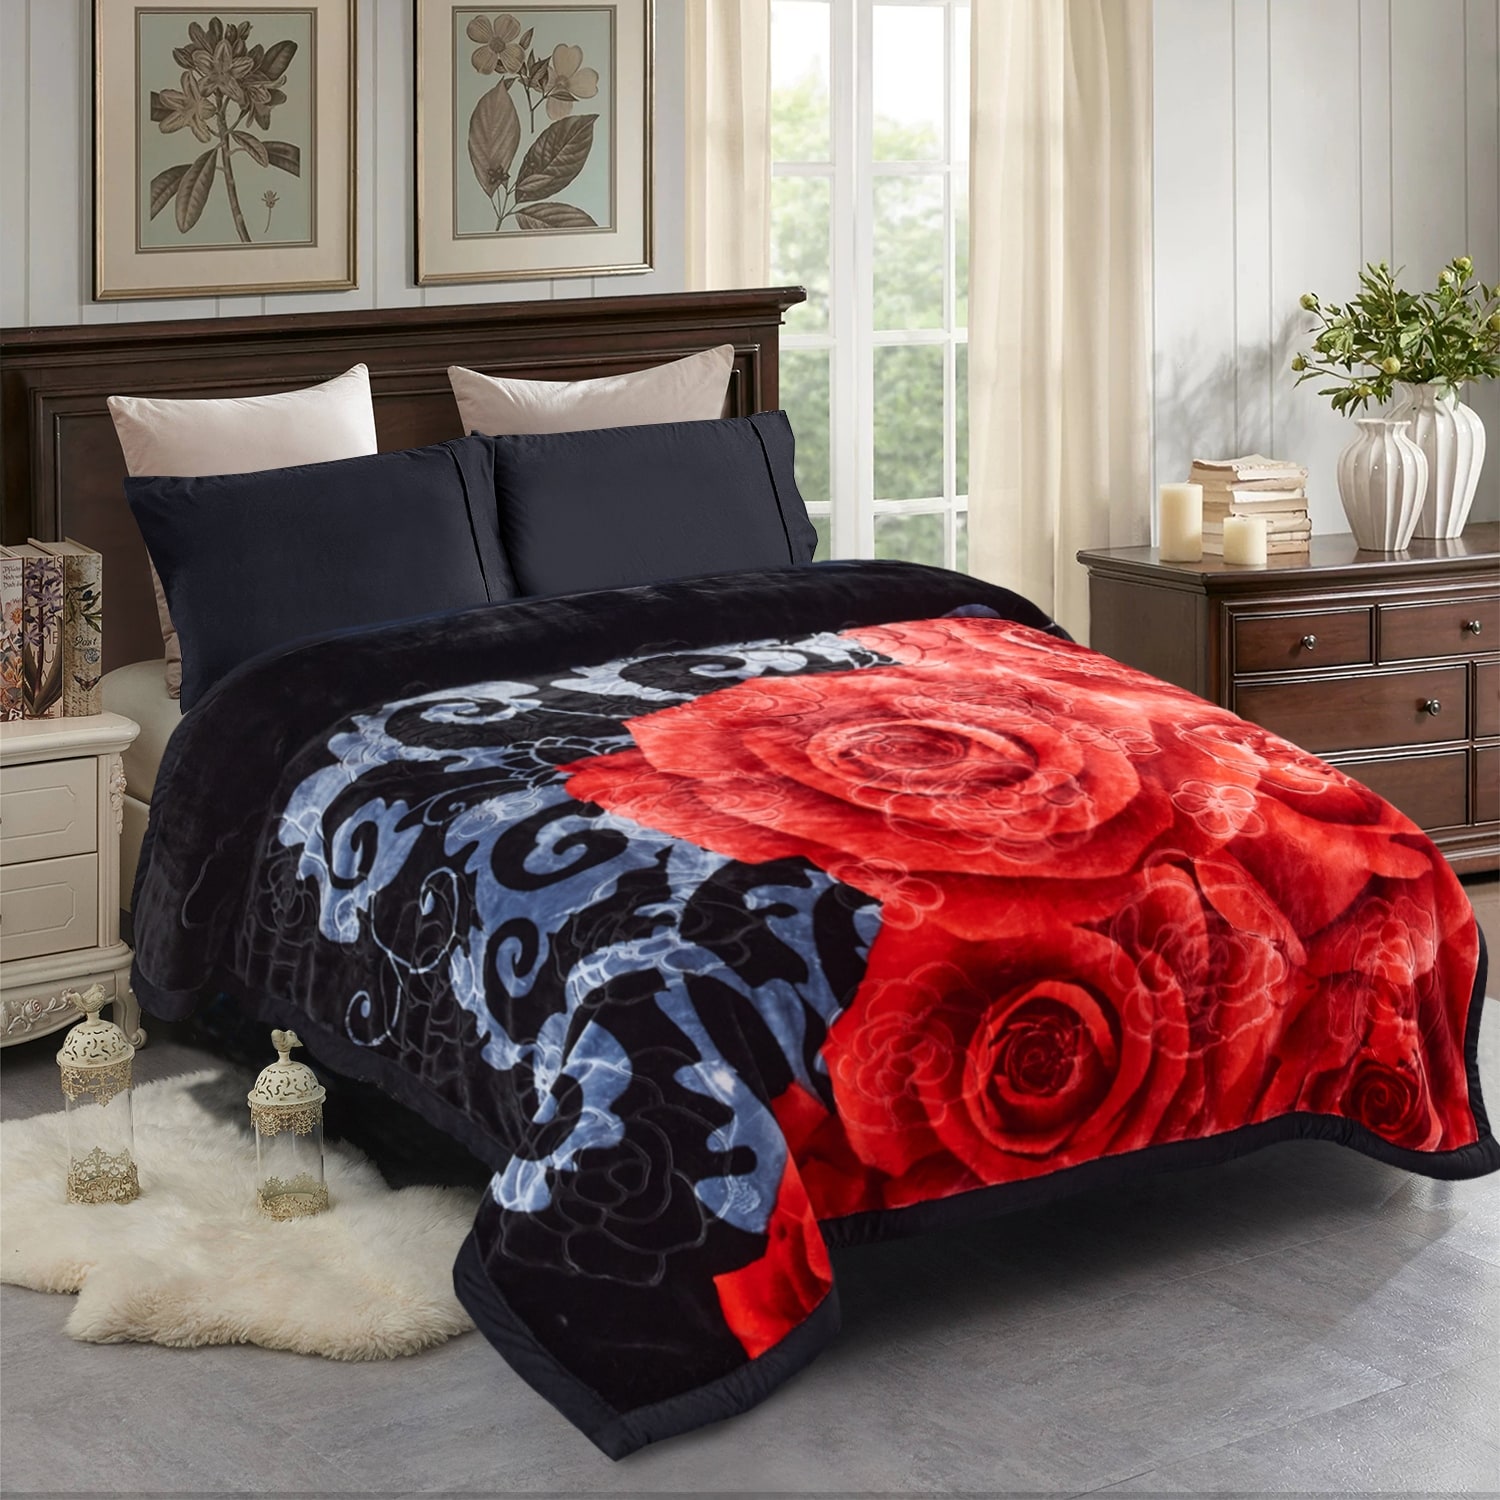 for Wife 3D Throw Fleece Blanket Super Soft Lightweight Bedspread All Season for Bed Couch Living Room Large Size 80X60in for Adult ZDBK23160 